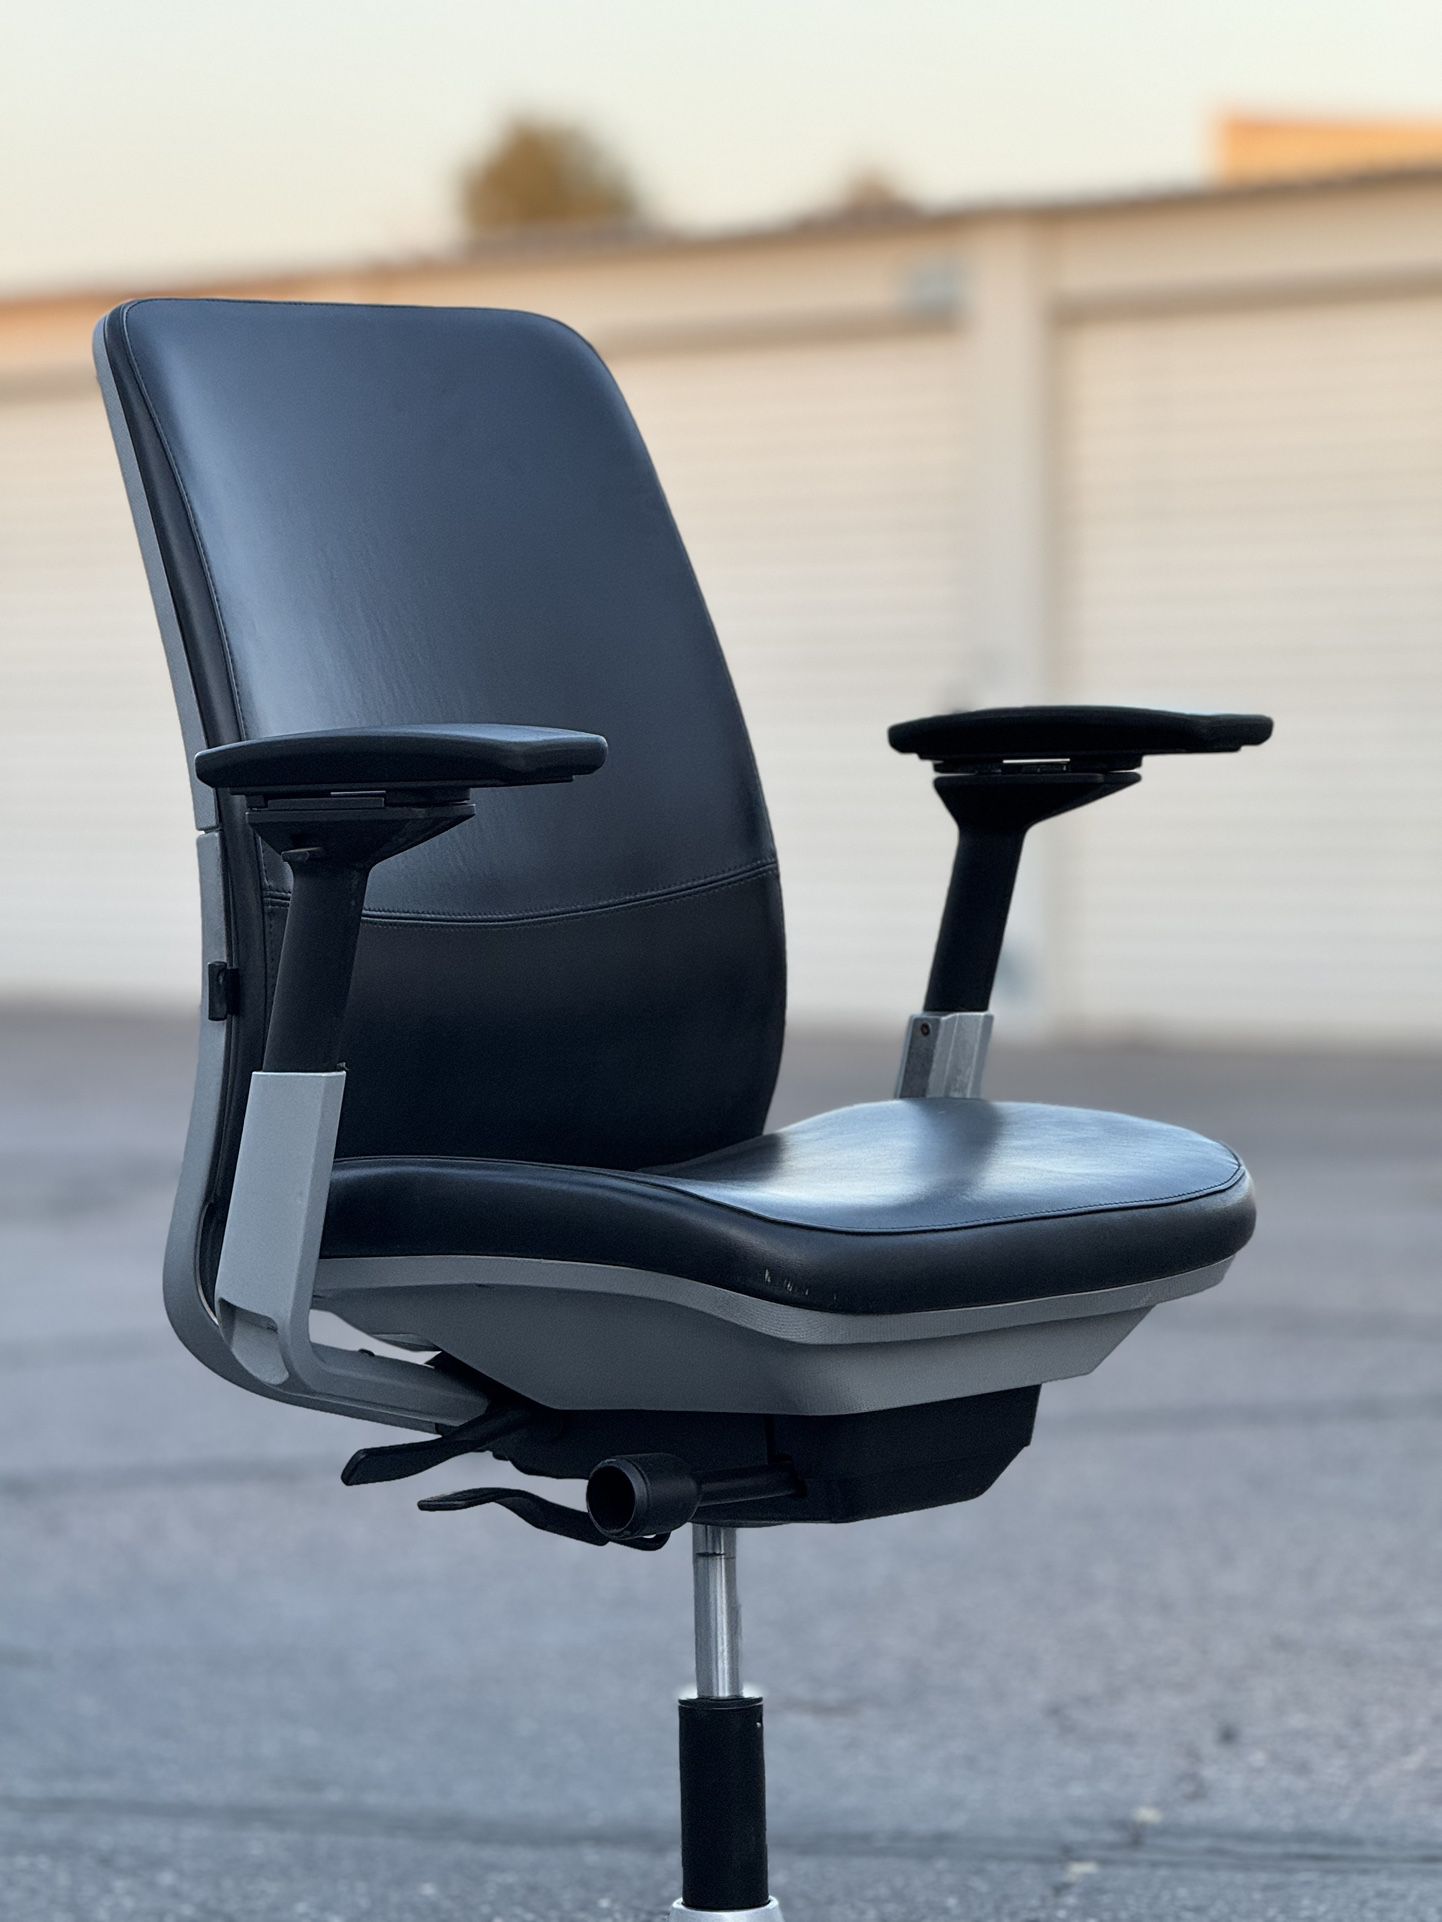 Steelcase Amia Black Leather Office Chair